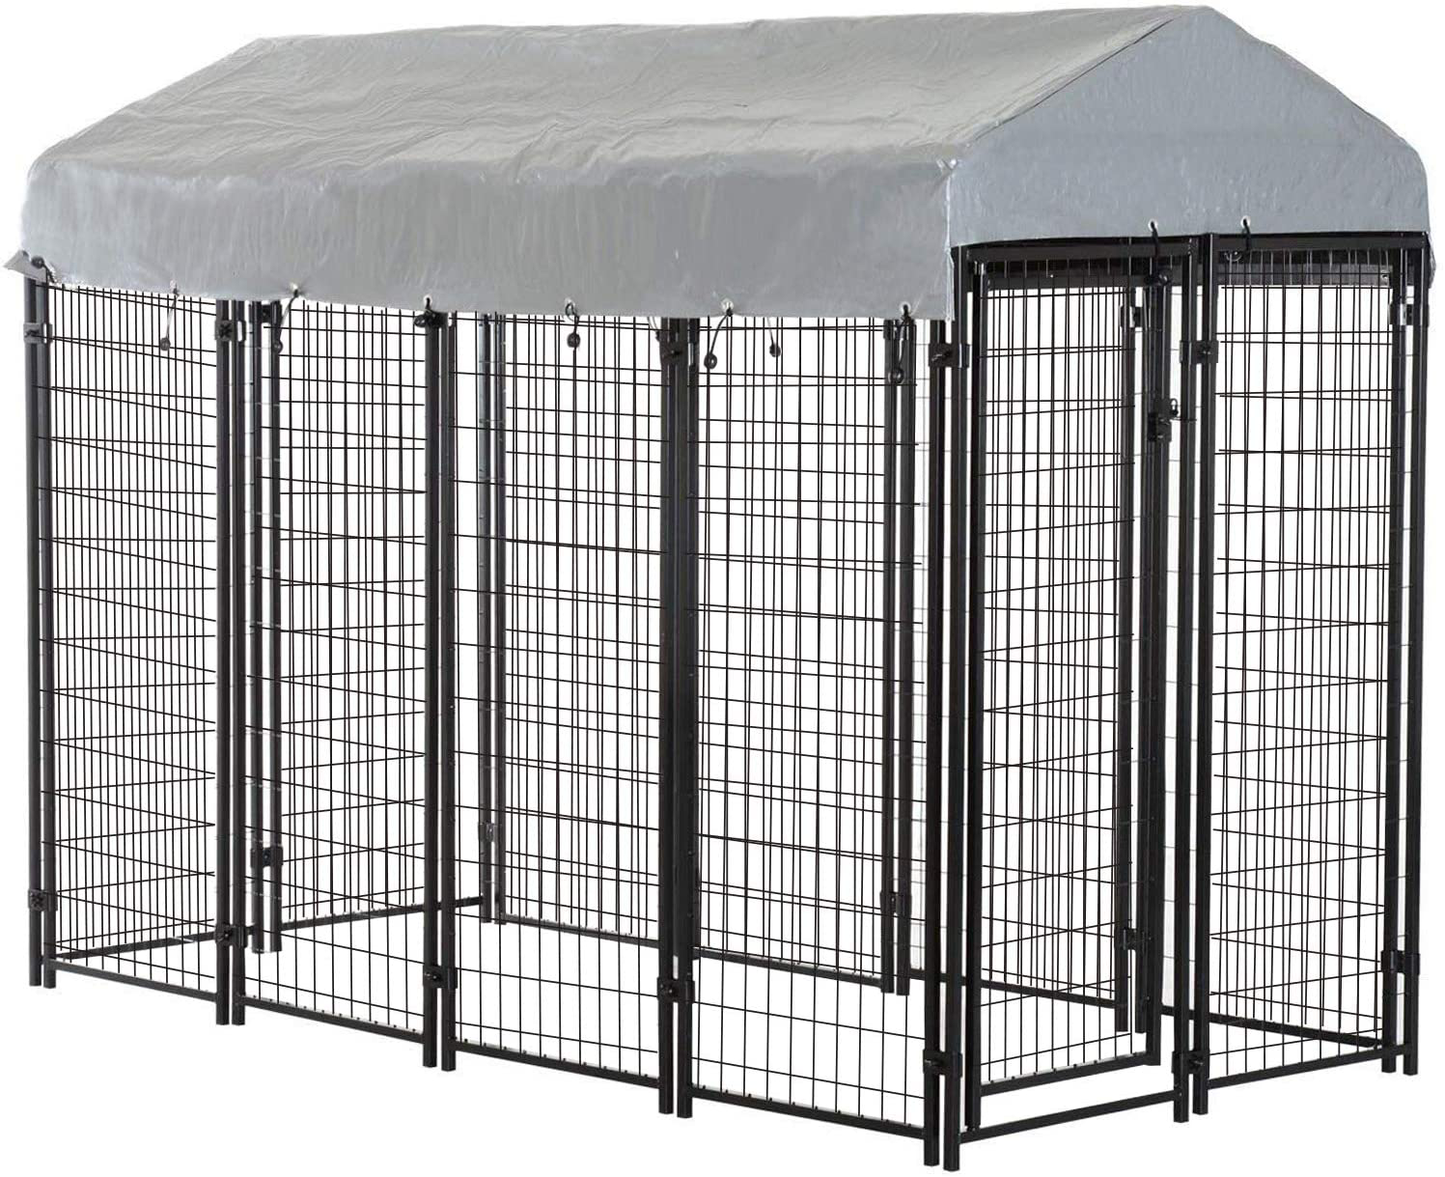 Bestpet Dog Crate Pet Kennel Cage Puppy Playpen Wire Animal Metal Camping Indoor Outdoor Cage for Large Dogs with Roof, 4 X 4 X 4.3,7.5 X 3.75 X 5.8 Feet Animals & Pet Supplies > Pet Supplies > Dog Supplies > Dog Kennels & Runs BestPet 7.5'x3.75'x5.8'  